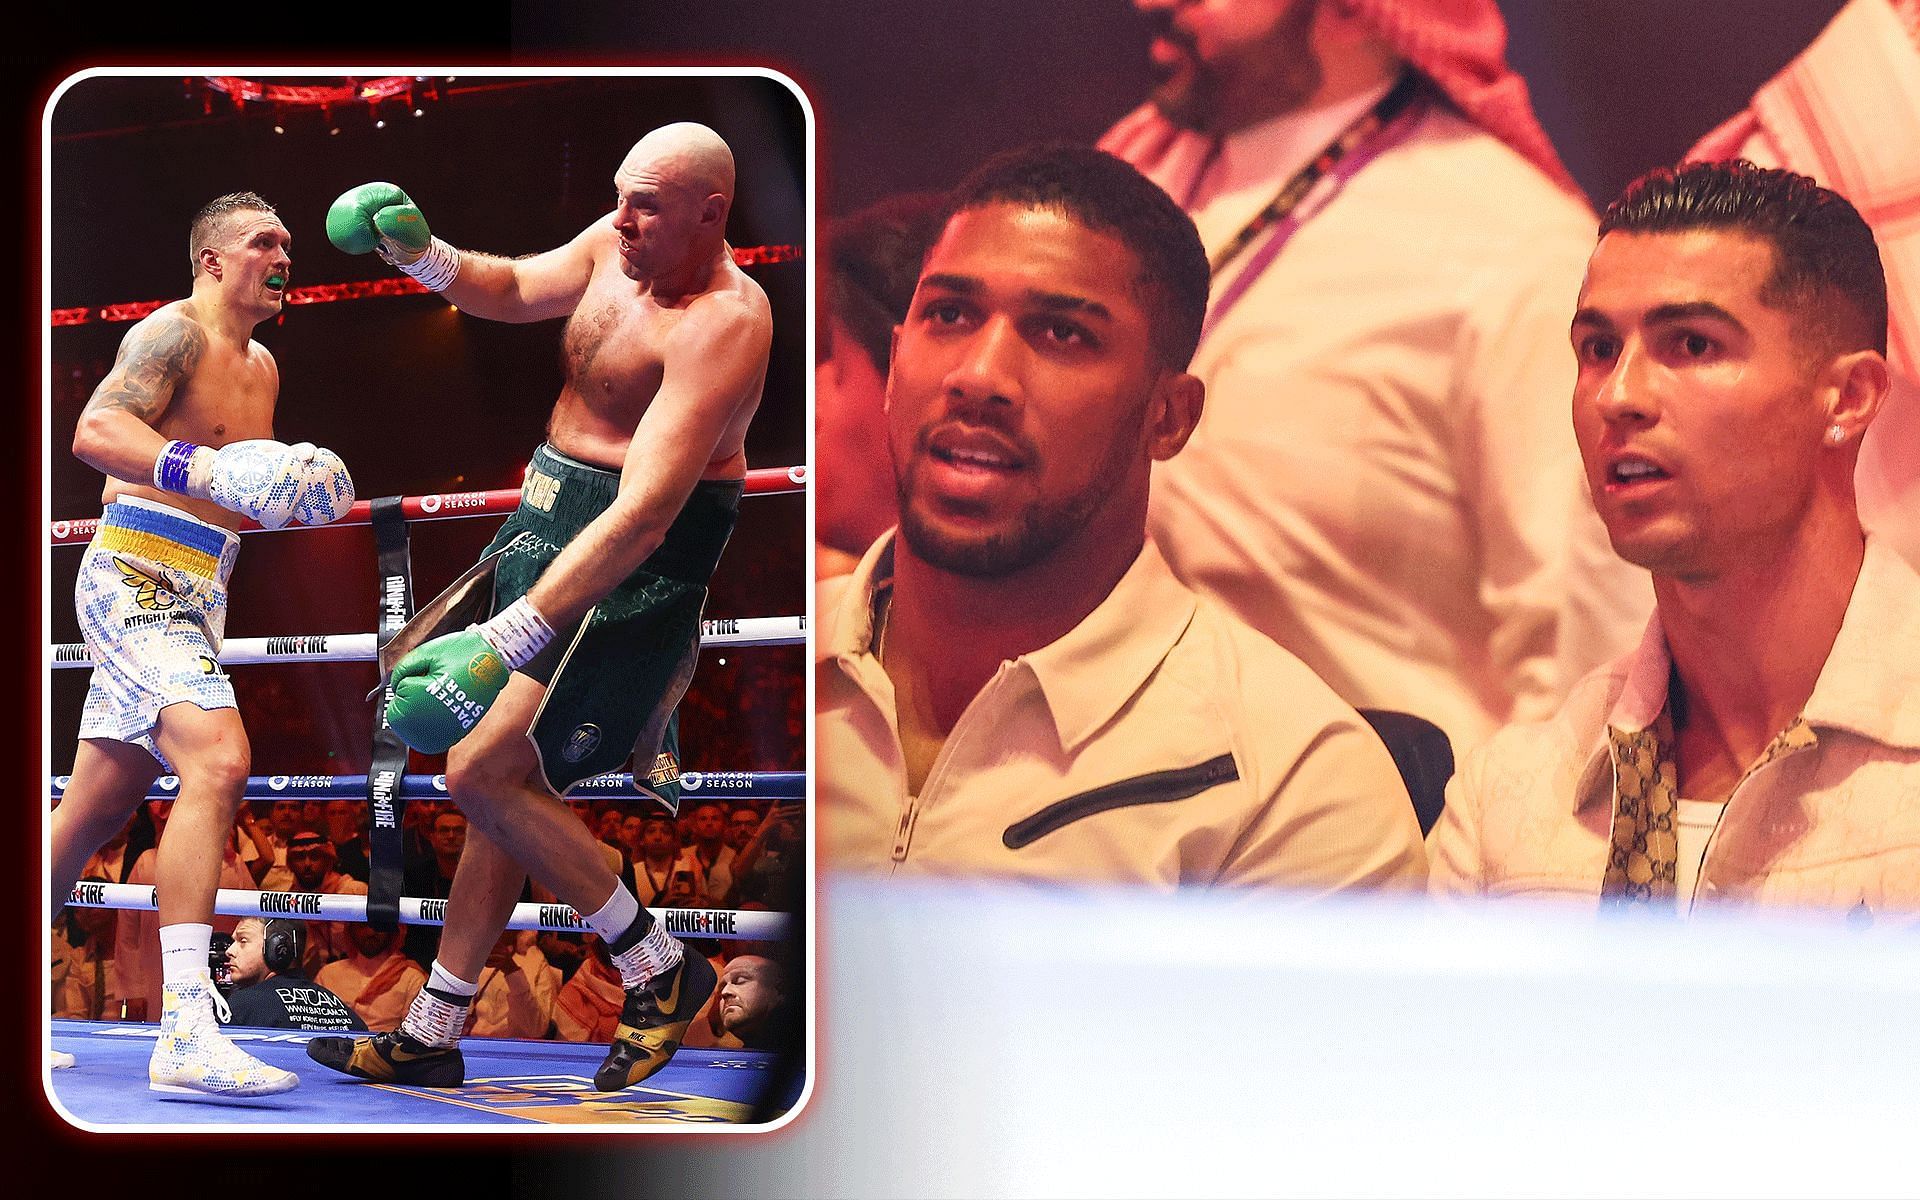 Anthony Joshua (center) and Cristiano Ronaldo (right) chatting during the undercard of Tyson Fury vs. Oleksandr Usyk fight (inset) [Images courtesy: Getty]